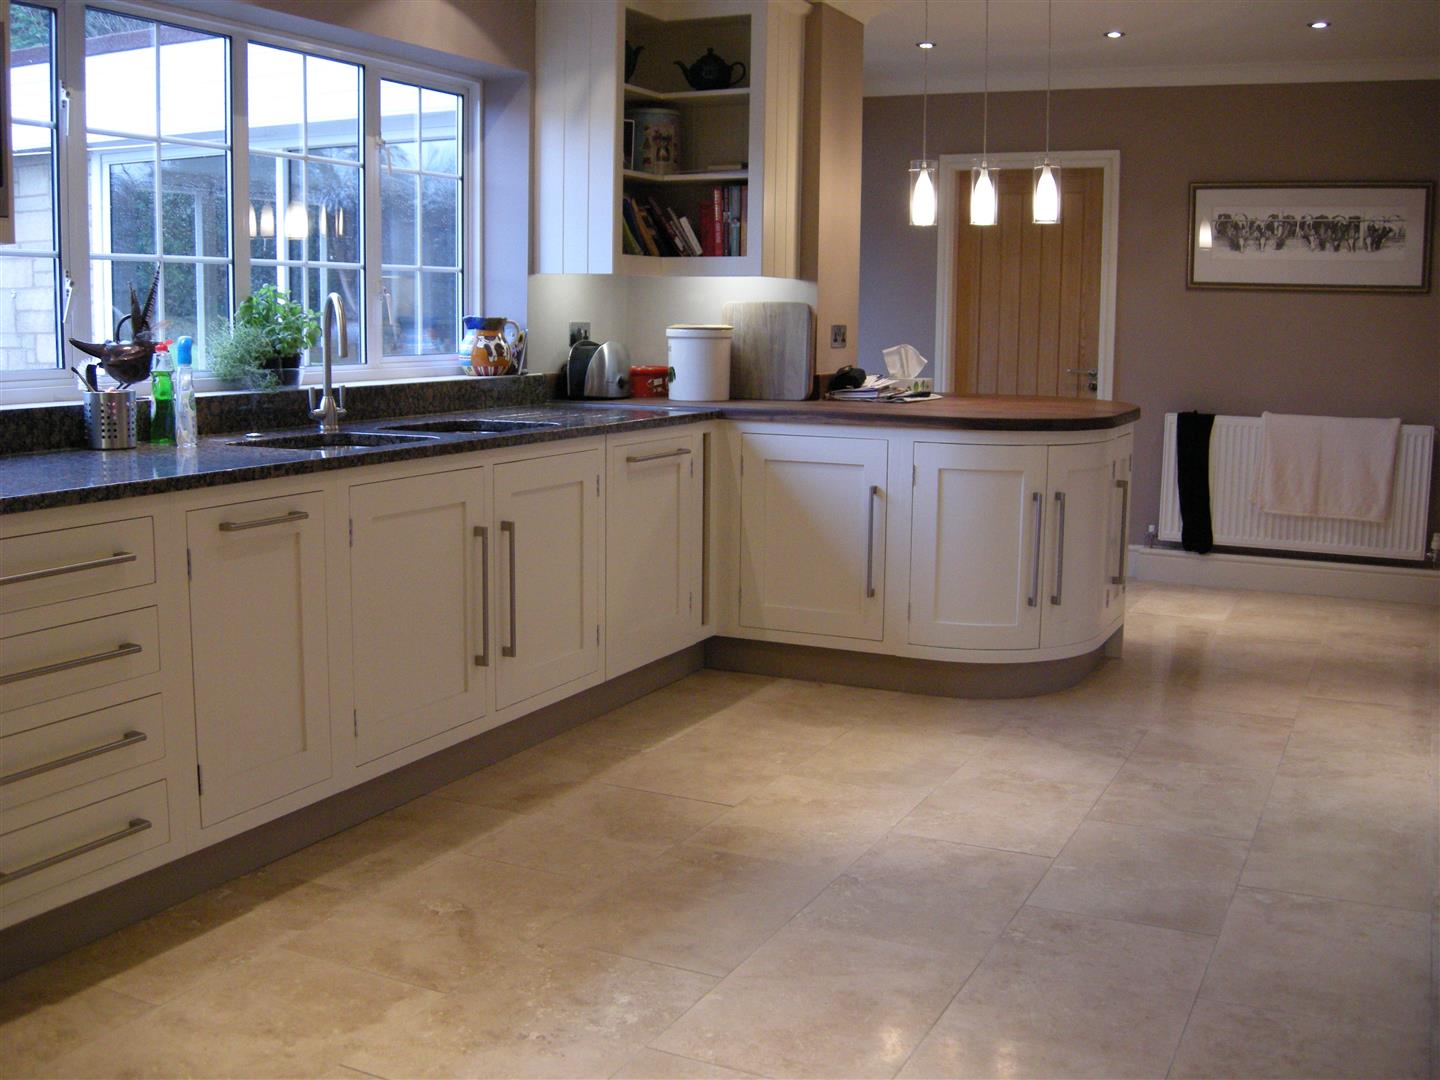 Redbrook kitchens design and install bespoke kitchens in Gloucestershire. Large Shaker kitchen with contemporary handles